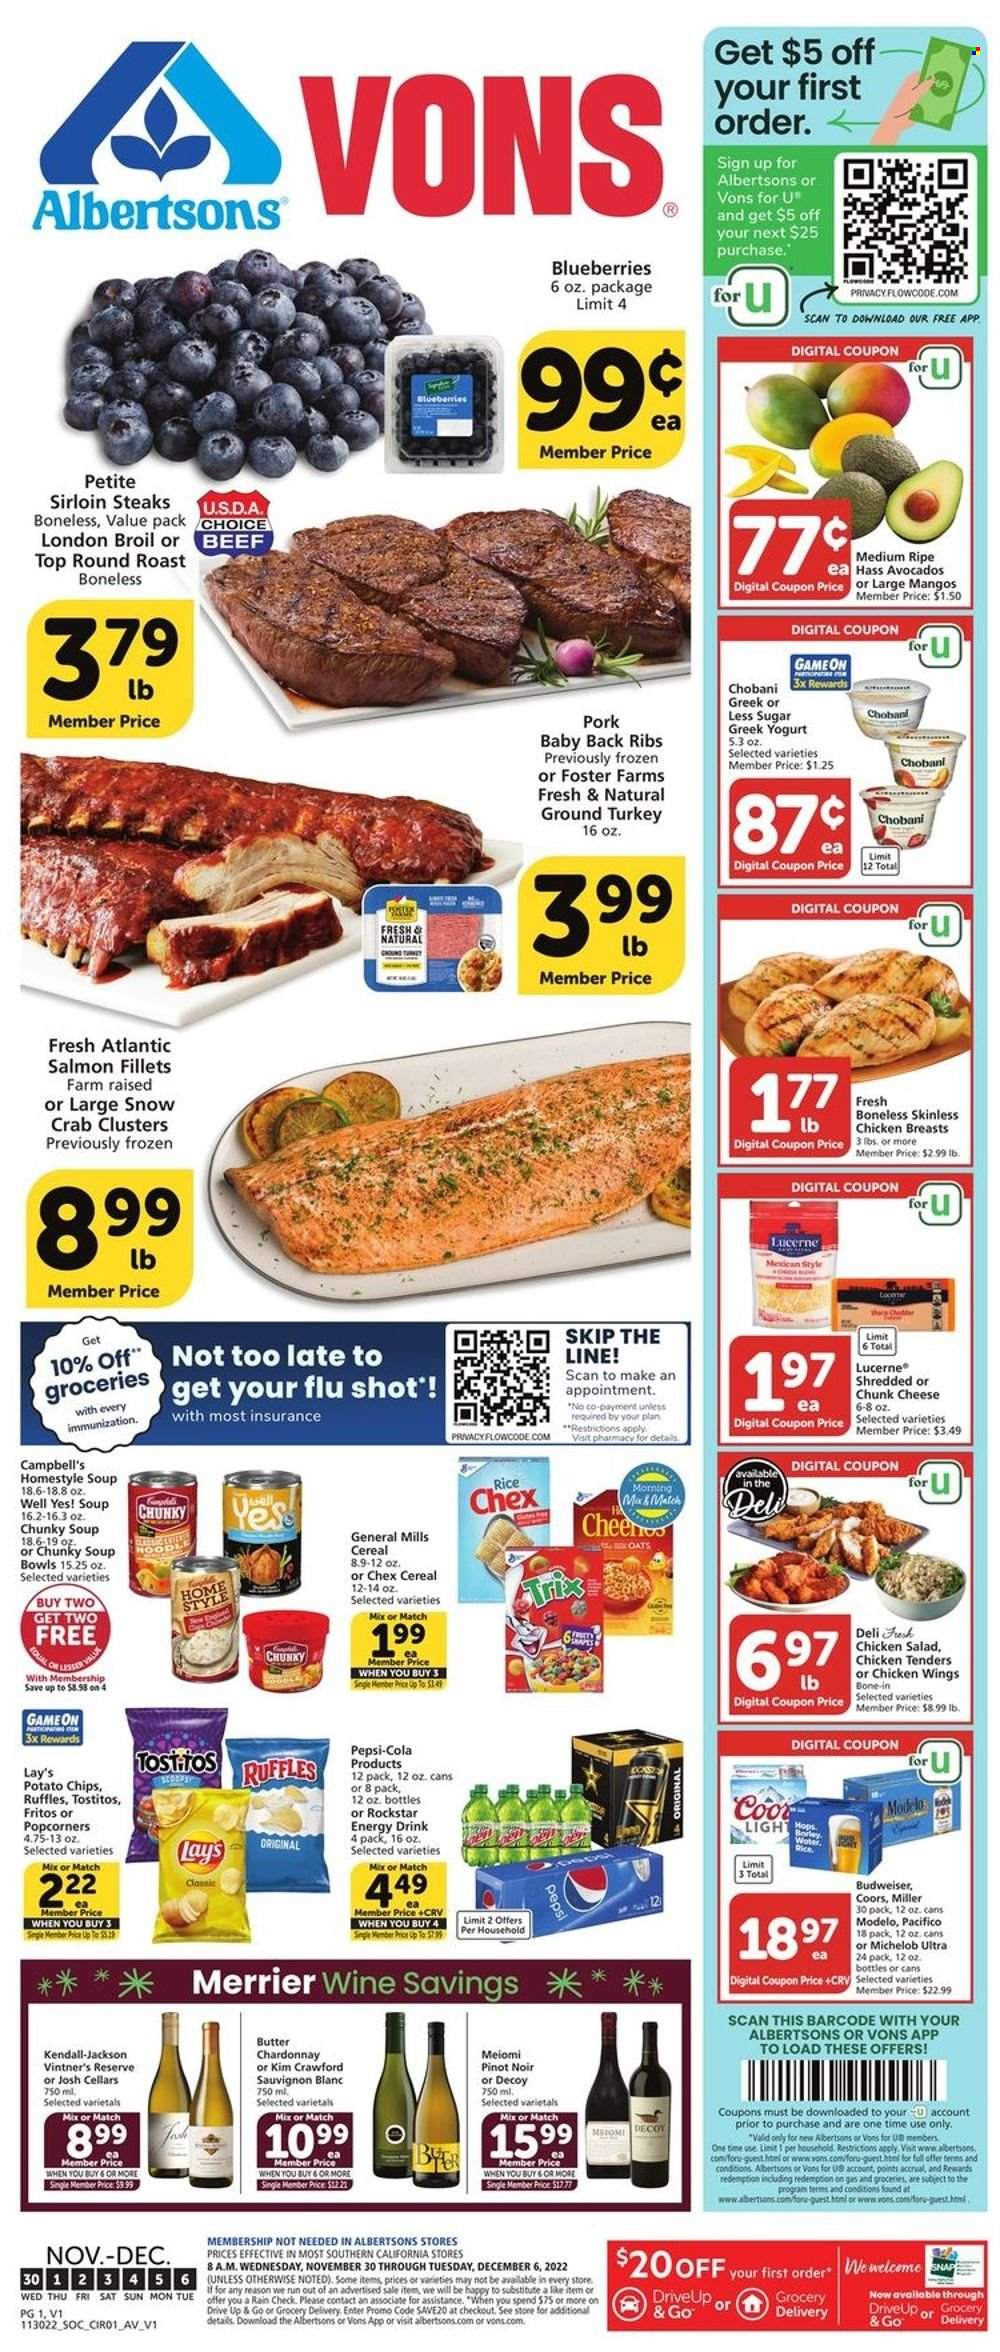 thumbnail - Albertsons Flyer - 11/30/2022 - 12/06/2022 - Sales products - avocado, blueberries, mango, salmon, salmon fillet, crab, Campbell's, chicken tenders, soup, chicken salad, cheese, chunk cheese, greek yoghurt, yoghurt, Chobani, butter, chicken wings, Fritos, potato chips, Lay’s, popcorn, Ruffles, Tostitos, cereals, rice, Pepsi, energy drink, Rockstar, red wine, white wine, Chardonnay, wine, Pinot Noir, Sauvignon Blanc, beer, Miller, Modelo, ground turkey, chicken breasts, beef meat, steak, round roast, sirloin steak, pork meat, pork ribs, pork back ribs, Budweiser, Coors, Michelob. Page 1.